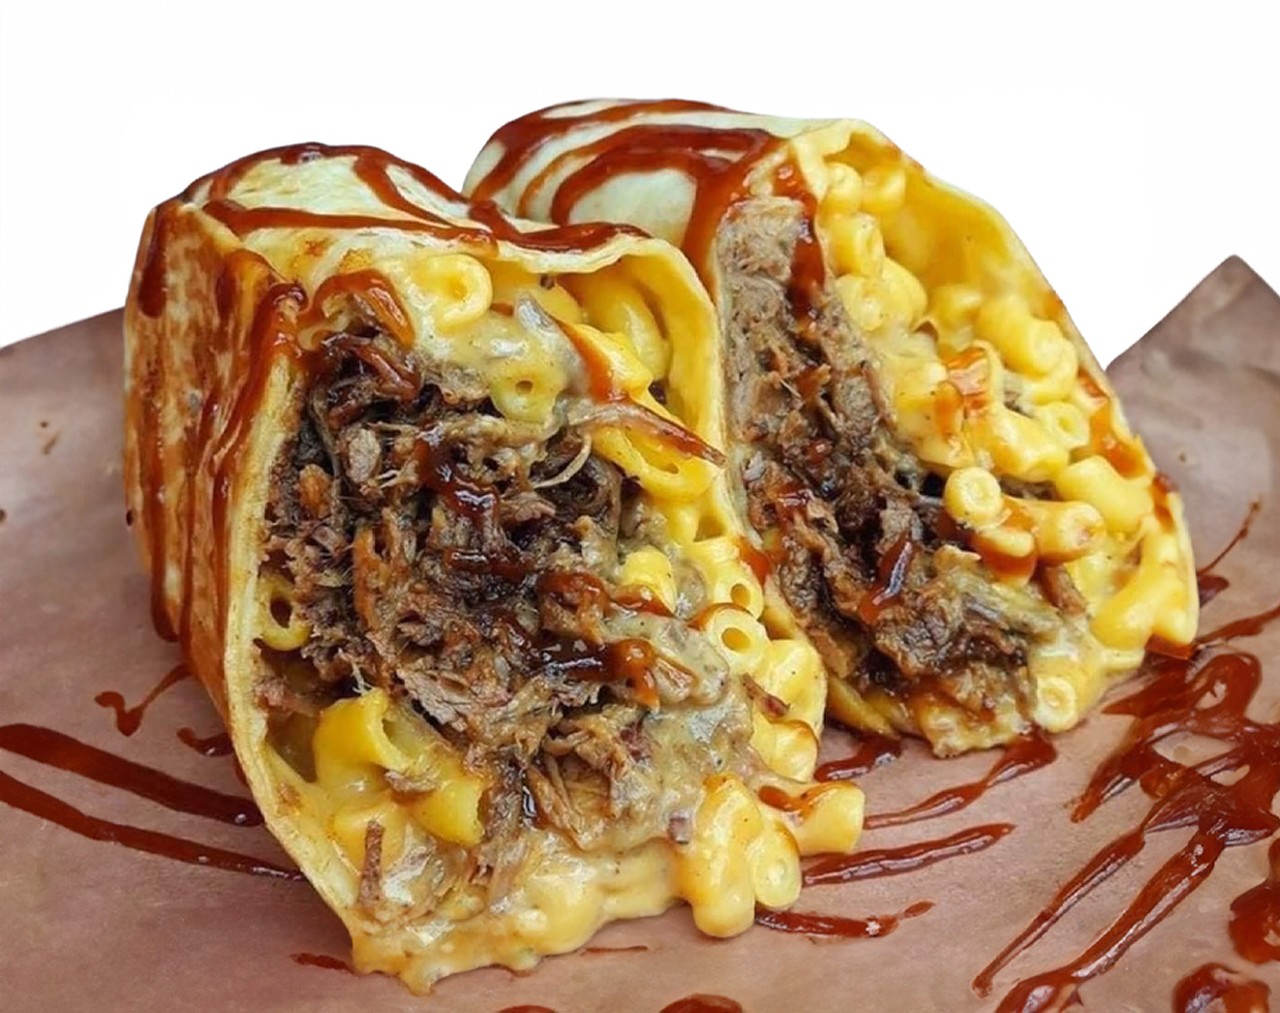 BBQ FRIED BURRITO
BBQ Pulled Pork and Mac N Cheese Stuffed Burrito then Fried to Perfection!
Location: Low N Slow Catering